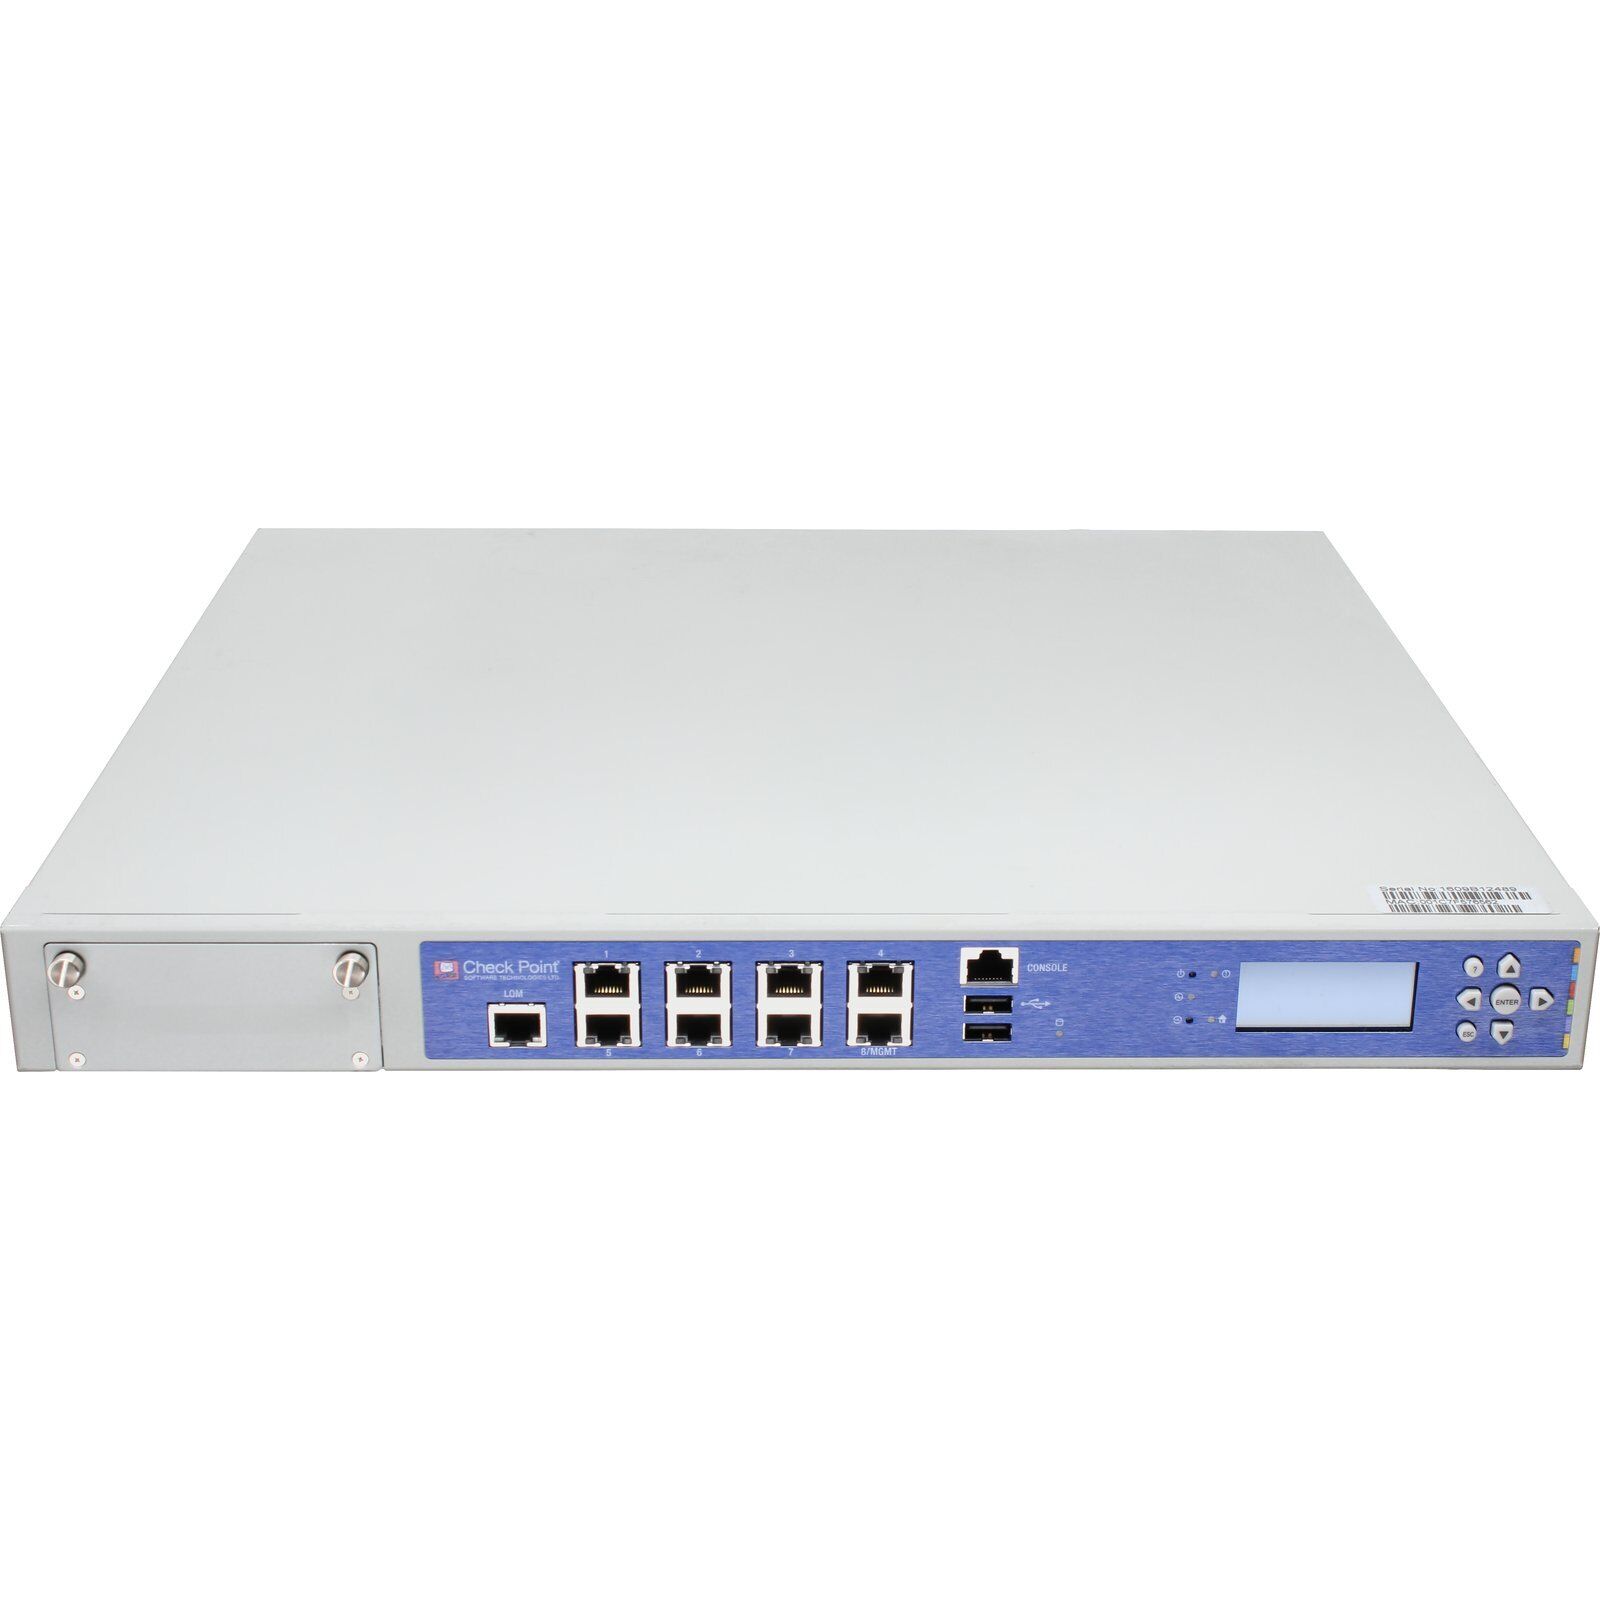 Check Point 4800 T-180 8P 1GbE Security Appliance